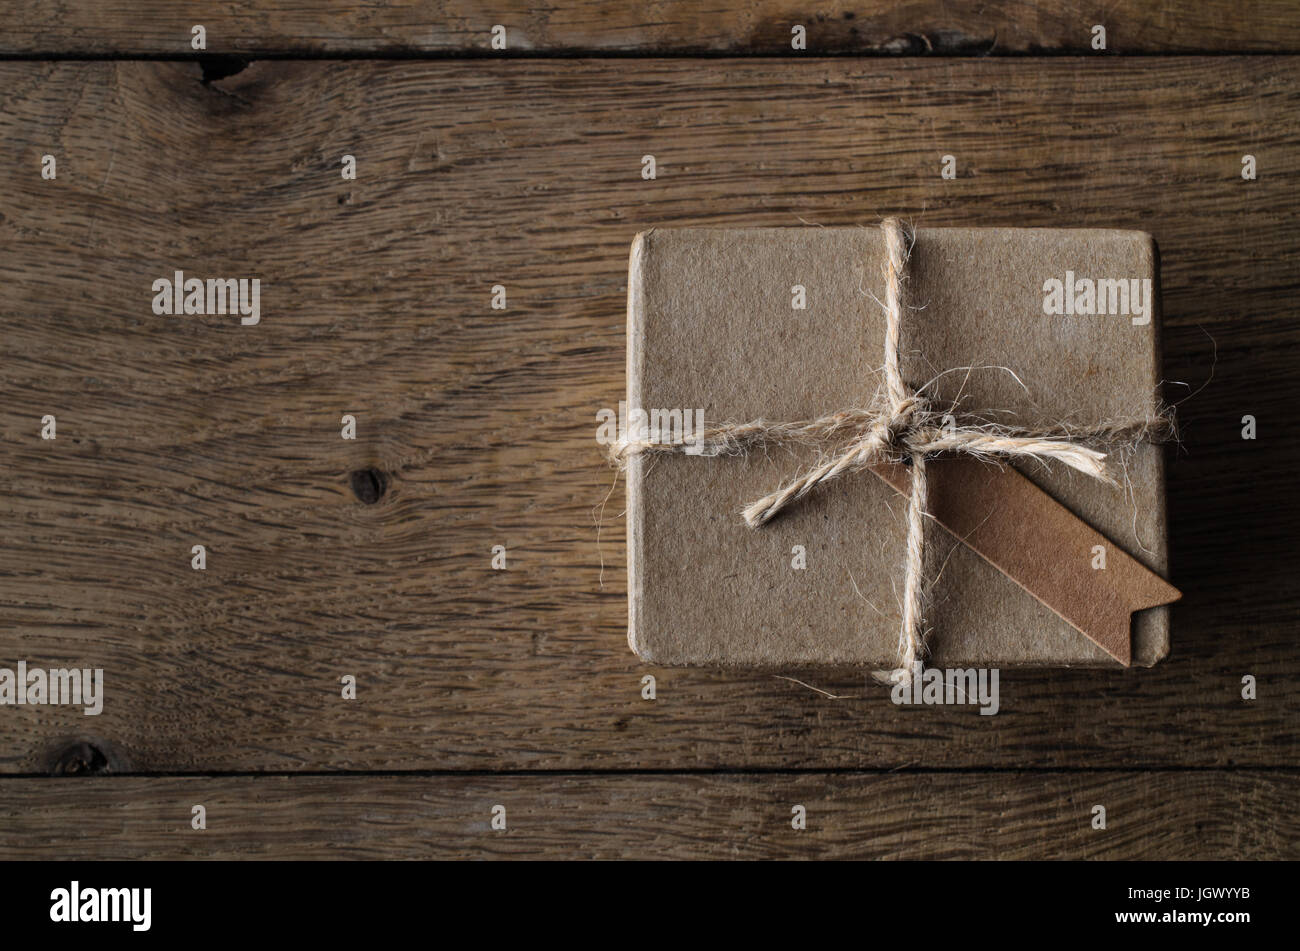 A simple, string tied gift box or package with a blank vintage style label tag.  Shot overhead on an old oak wood planked table. Stock Photo